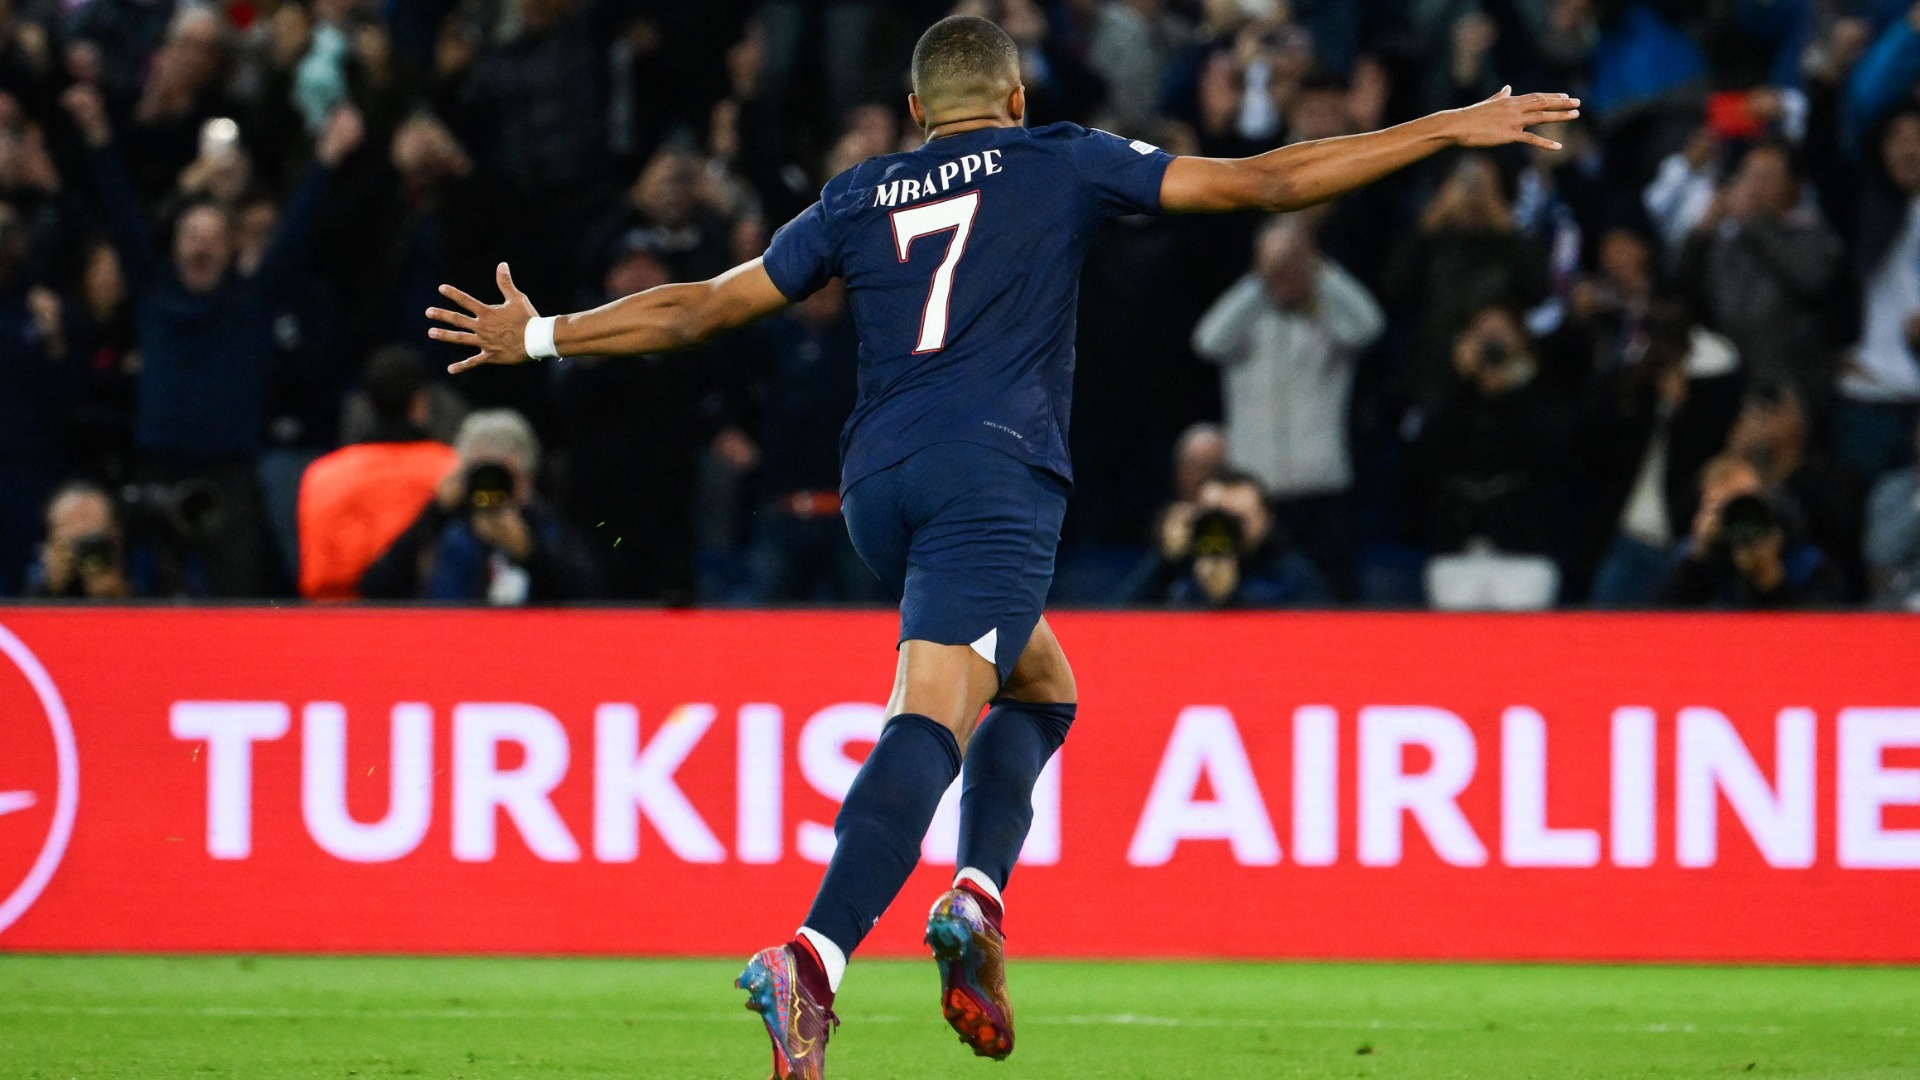 Mbappé-Real Madrid Transfer This Summer Is Difficult, Journalist Says